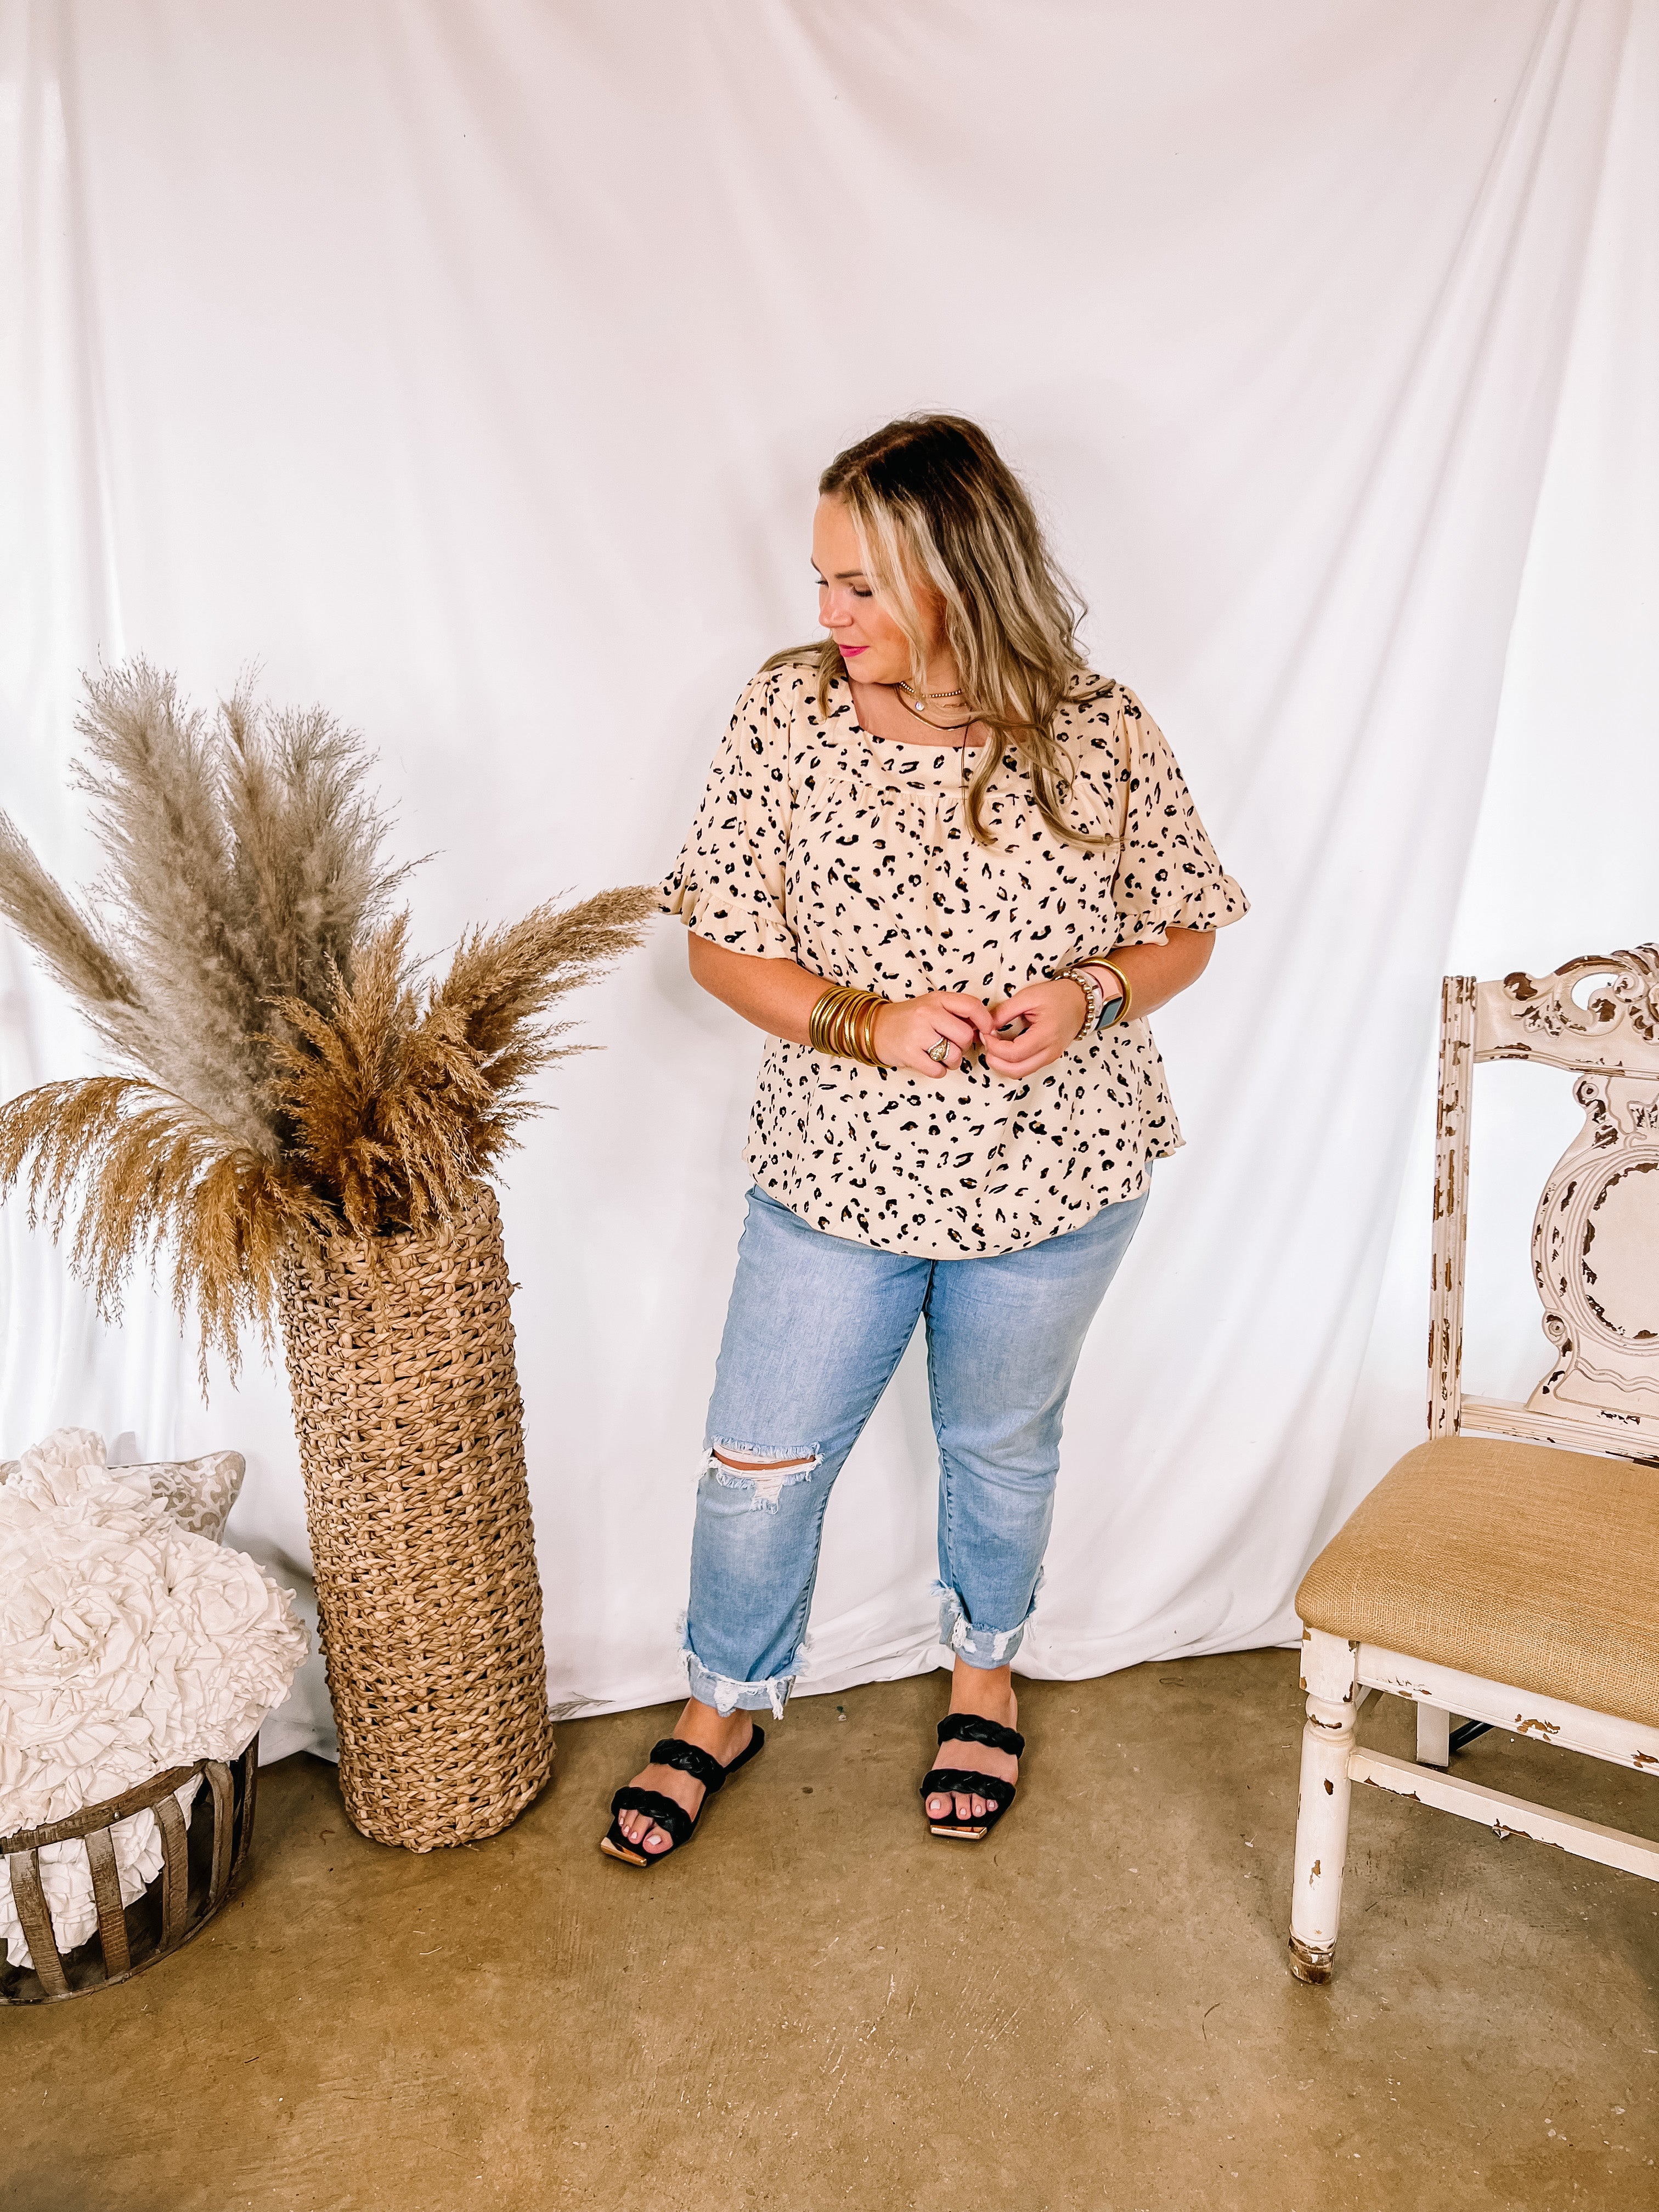 New Best Friend Square Neck Ruffle Short Sleeve Top in Leopard Print - Giddy Up Glamour Boutique